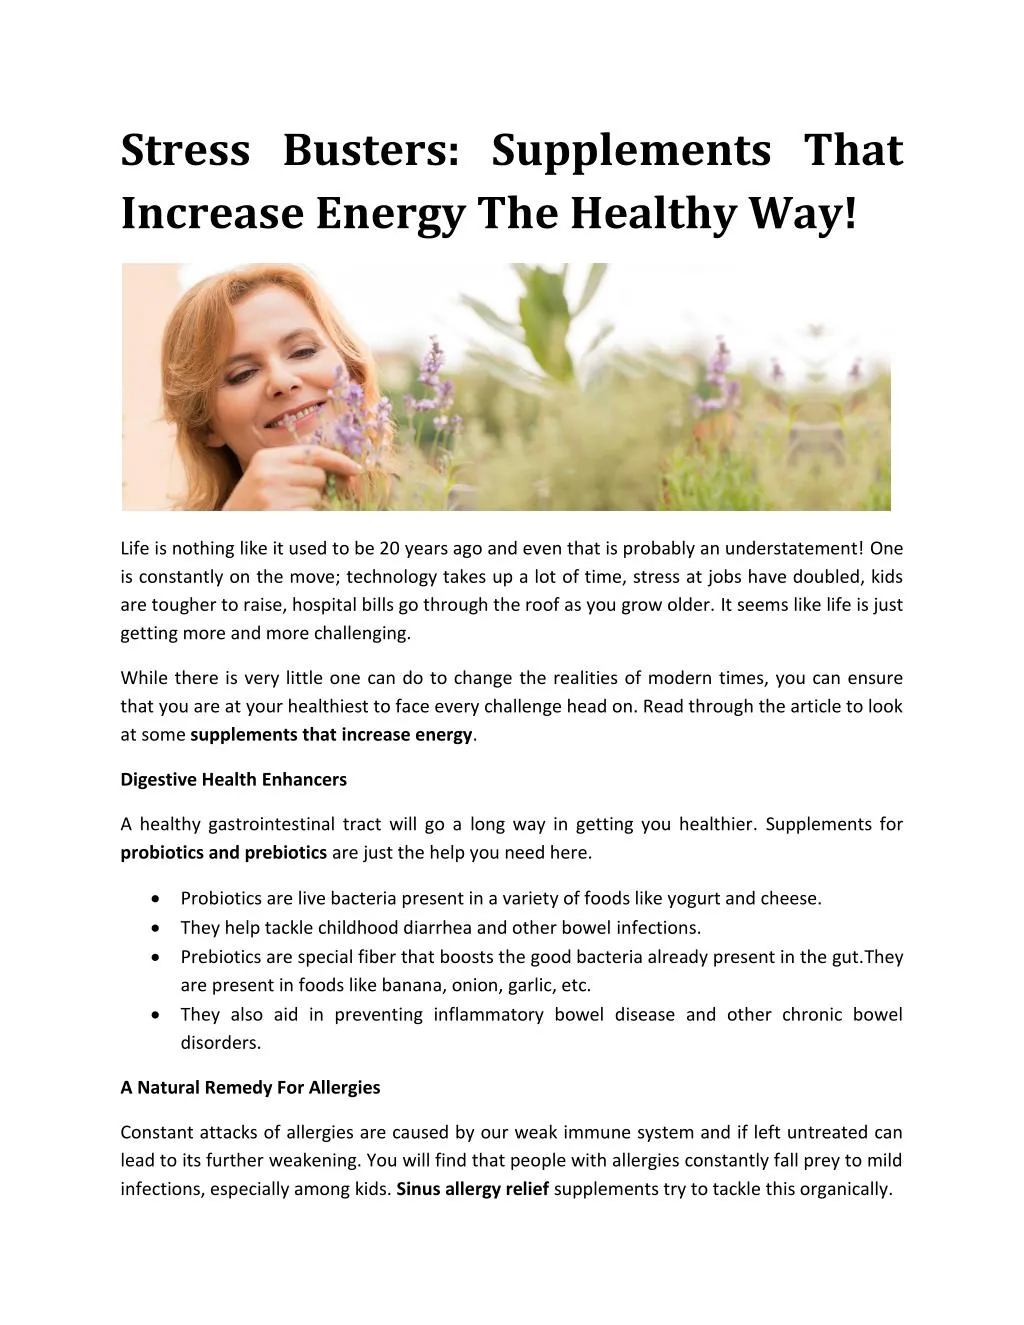 stress busters supplements that increase energy